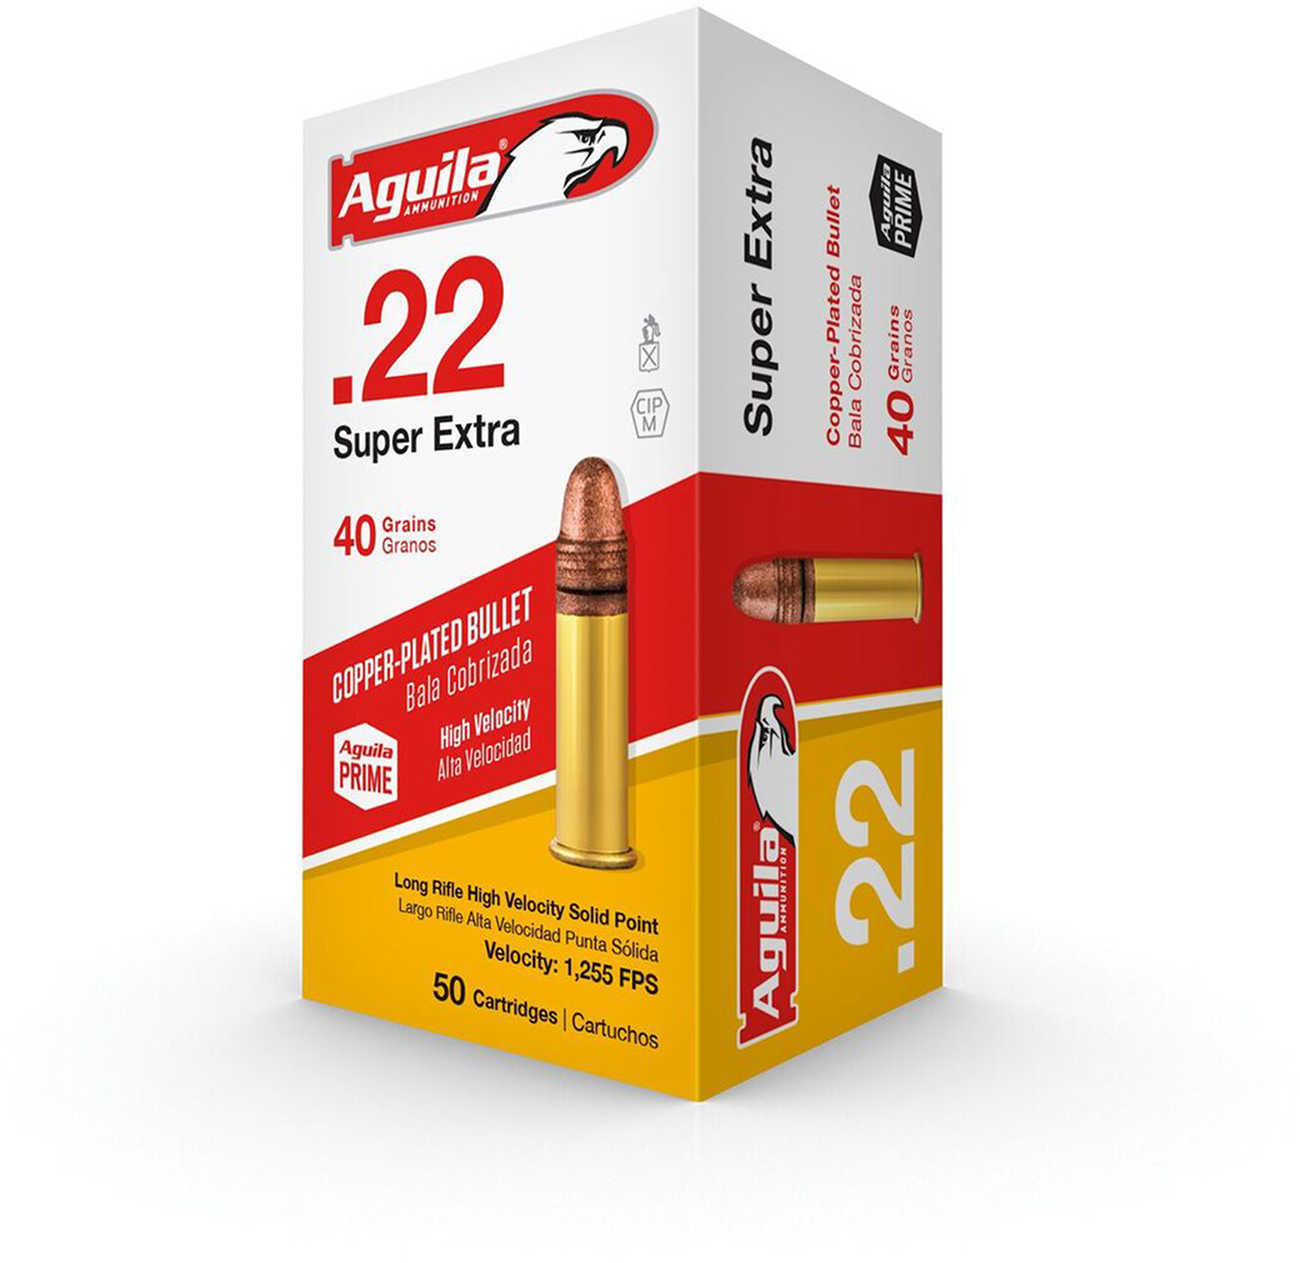 Link to Caliber: .22 LR - Weight: 40gr - Bullet: Copper-Plated Solid Point - Case: Brass - Velocity: 1255 fps - Qty: (50) Rounds per Box - KILL MORE BULL’S-EYES. - These high velocity rounds are perfect for target shooting or plinking and provide tight groupings. The copper-plated bullet provides excellent accuracy consistent performance and smooth cycling.